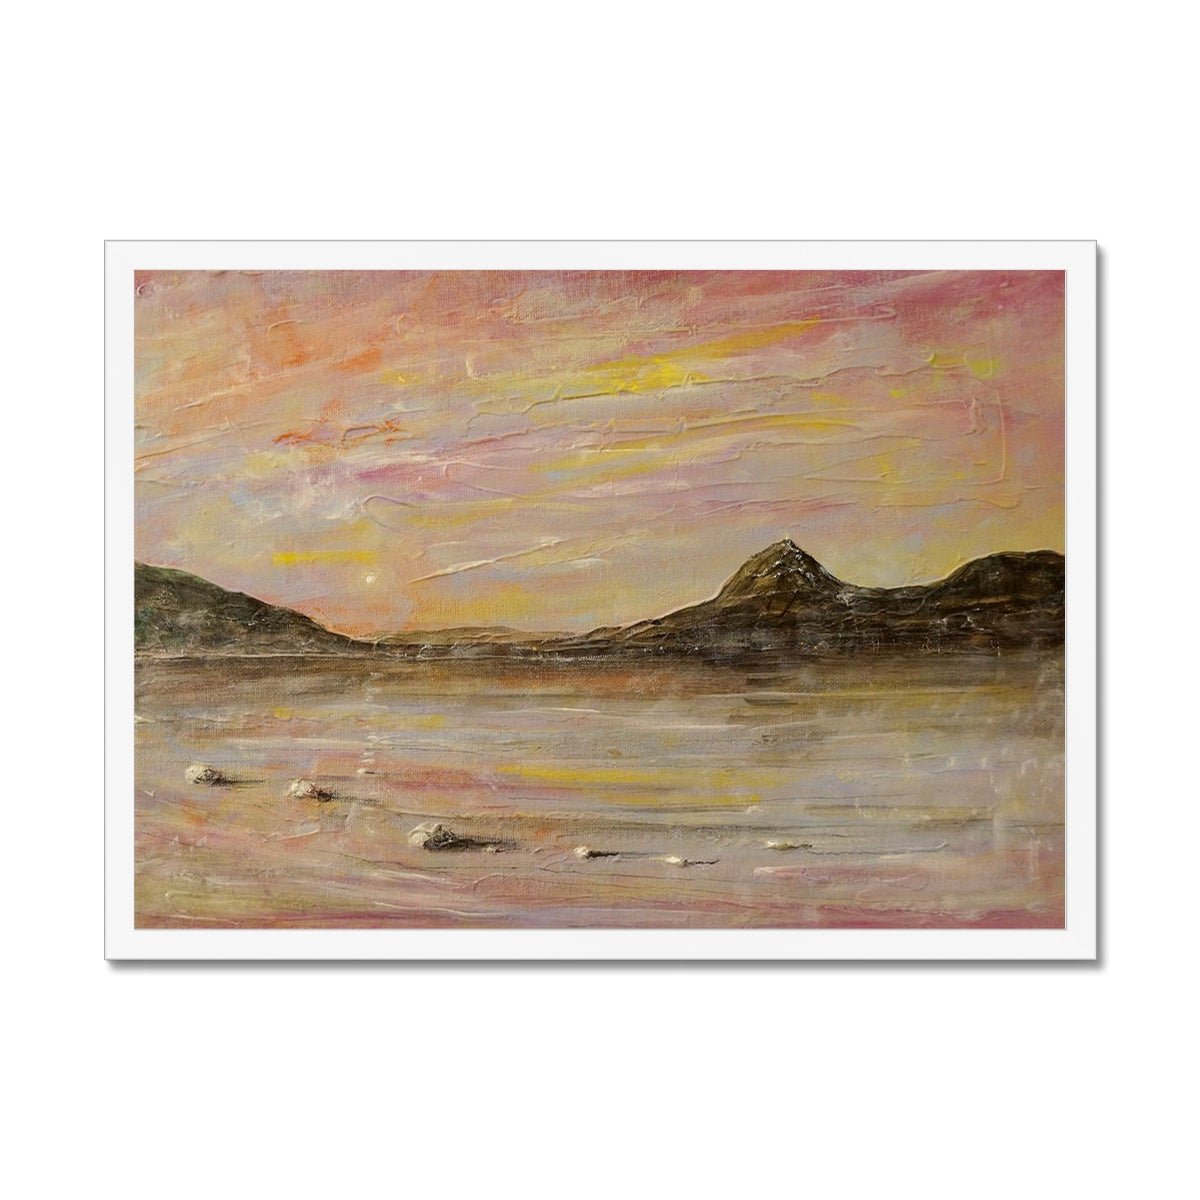 Loch Rannoch Dawn Painting | Framed Prints From Scotland-Framed Prints-Scottish Lochs & Mountains Art Gallery-A2 Landscape-White Frame-Paintings, Prints, Homeware, Art Gifts From Scotland By Scottish Artist Kevin Hunter